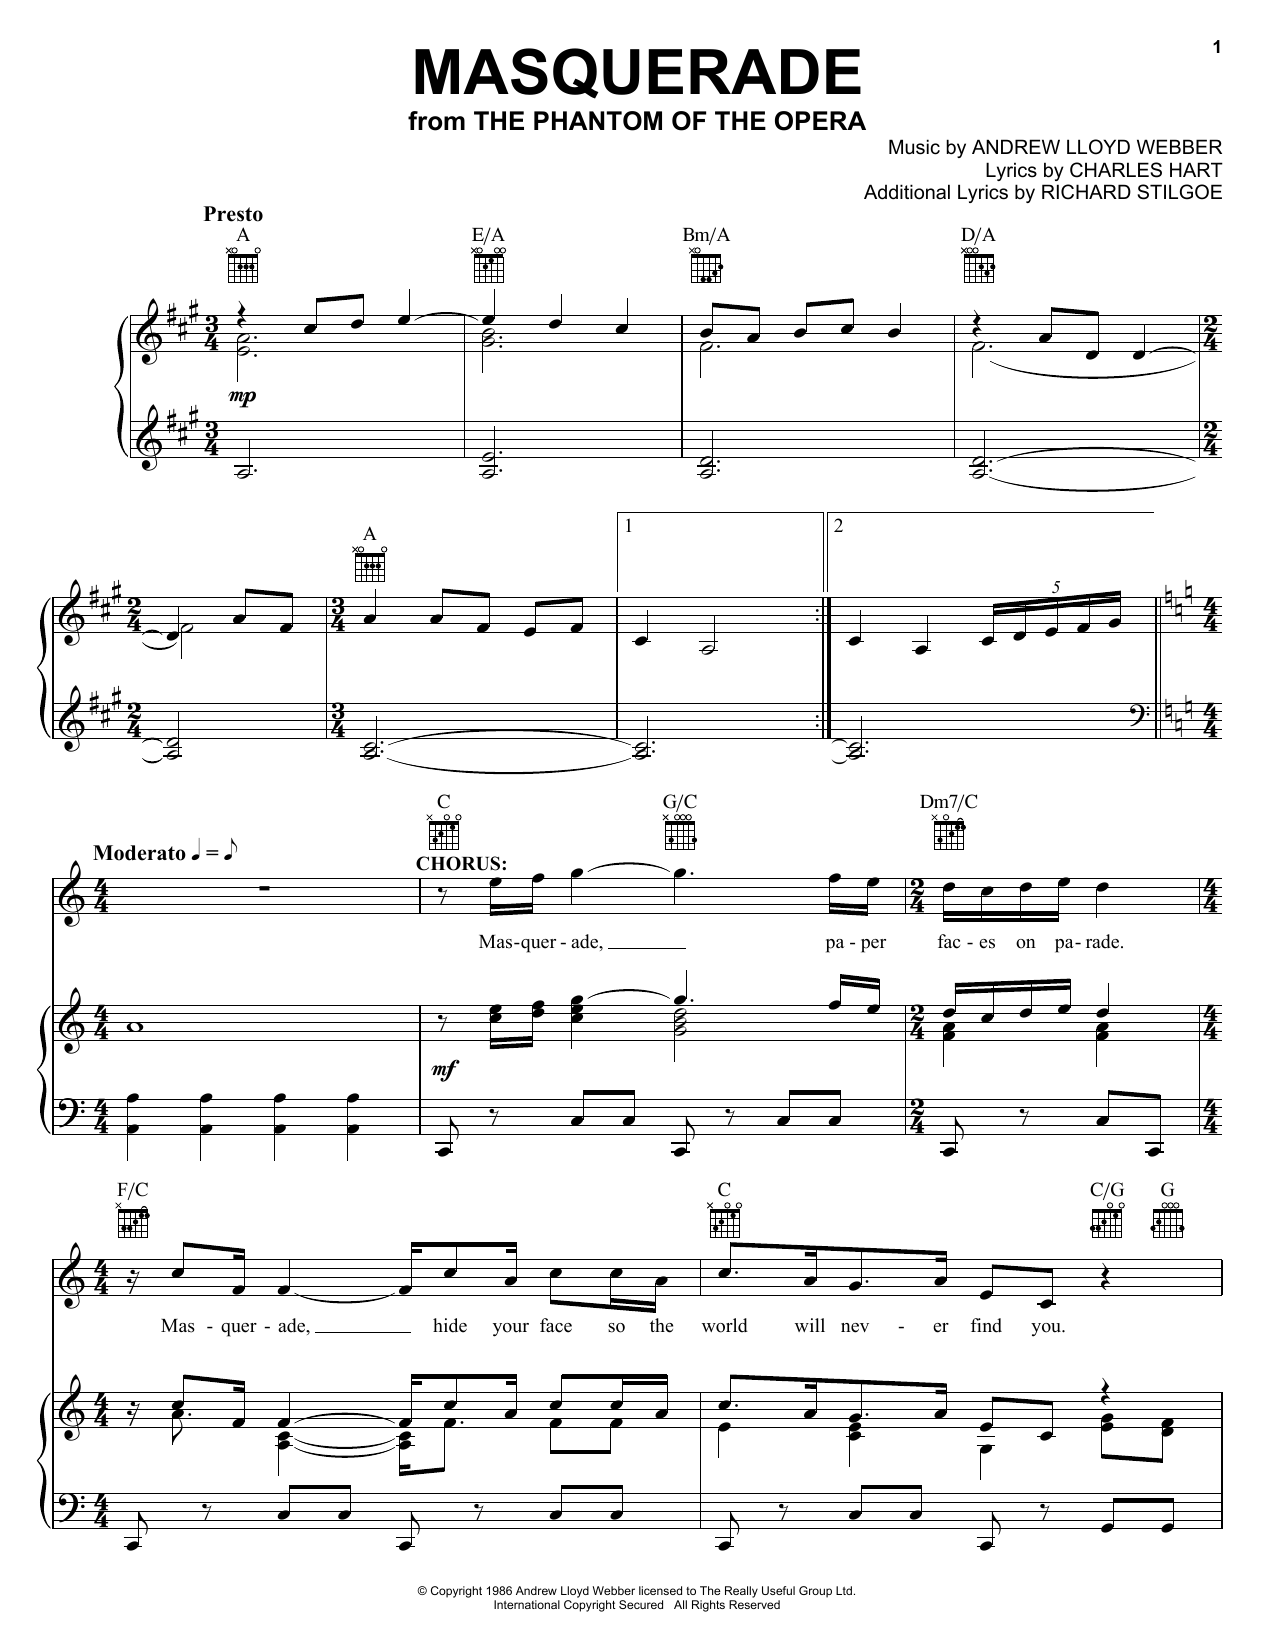 Andrew Lloyd Webber Masquerade (from The Phantom Of The Opera) sheet music notes and chords. Download Printable PDF.